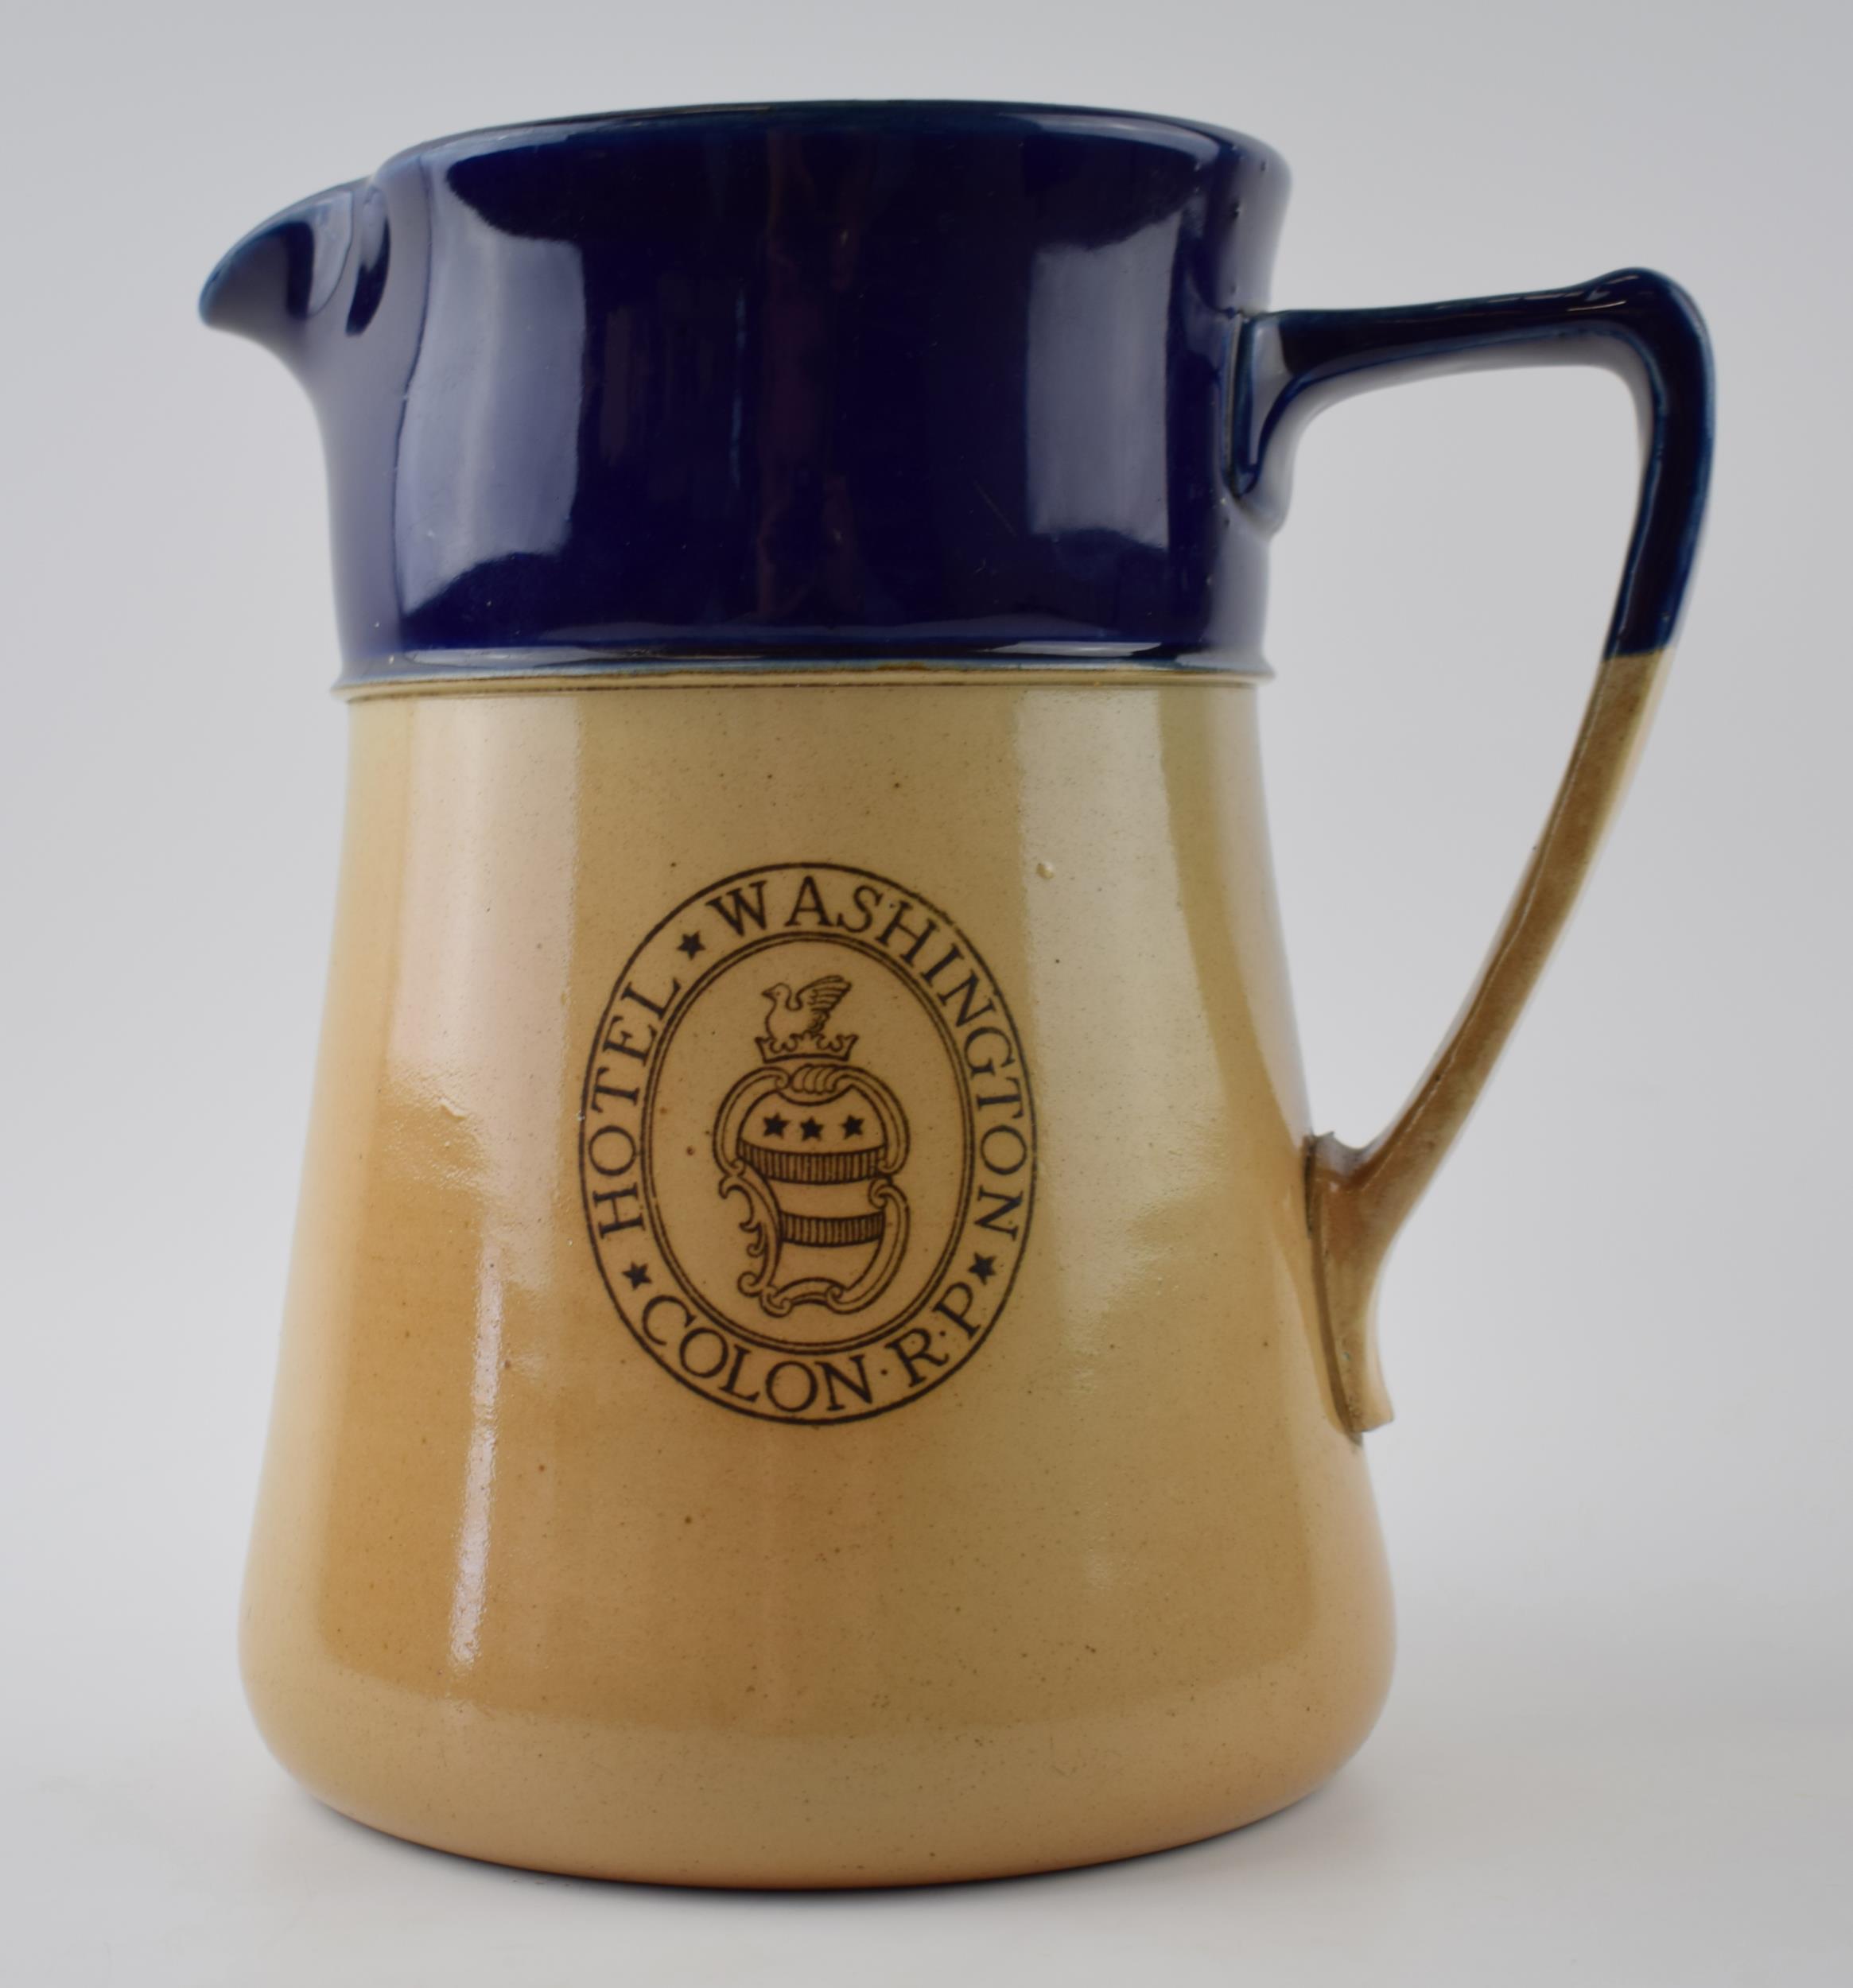 Royal Doulton advertising jug, in two tone colours, Hotel Washington Colon RP, 22cm tall. In good